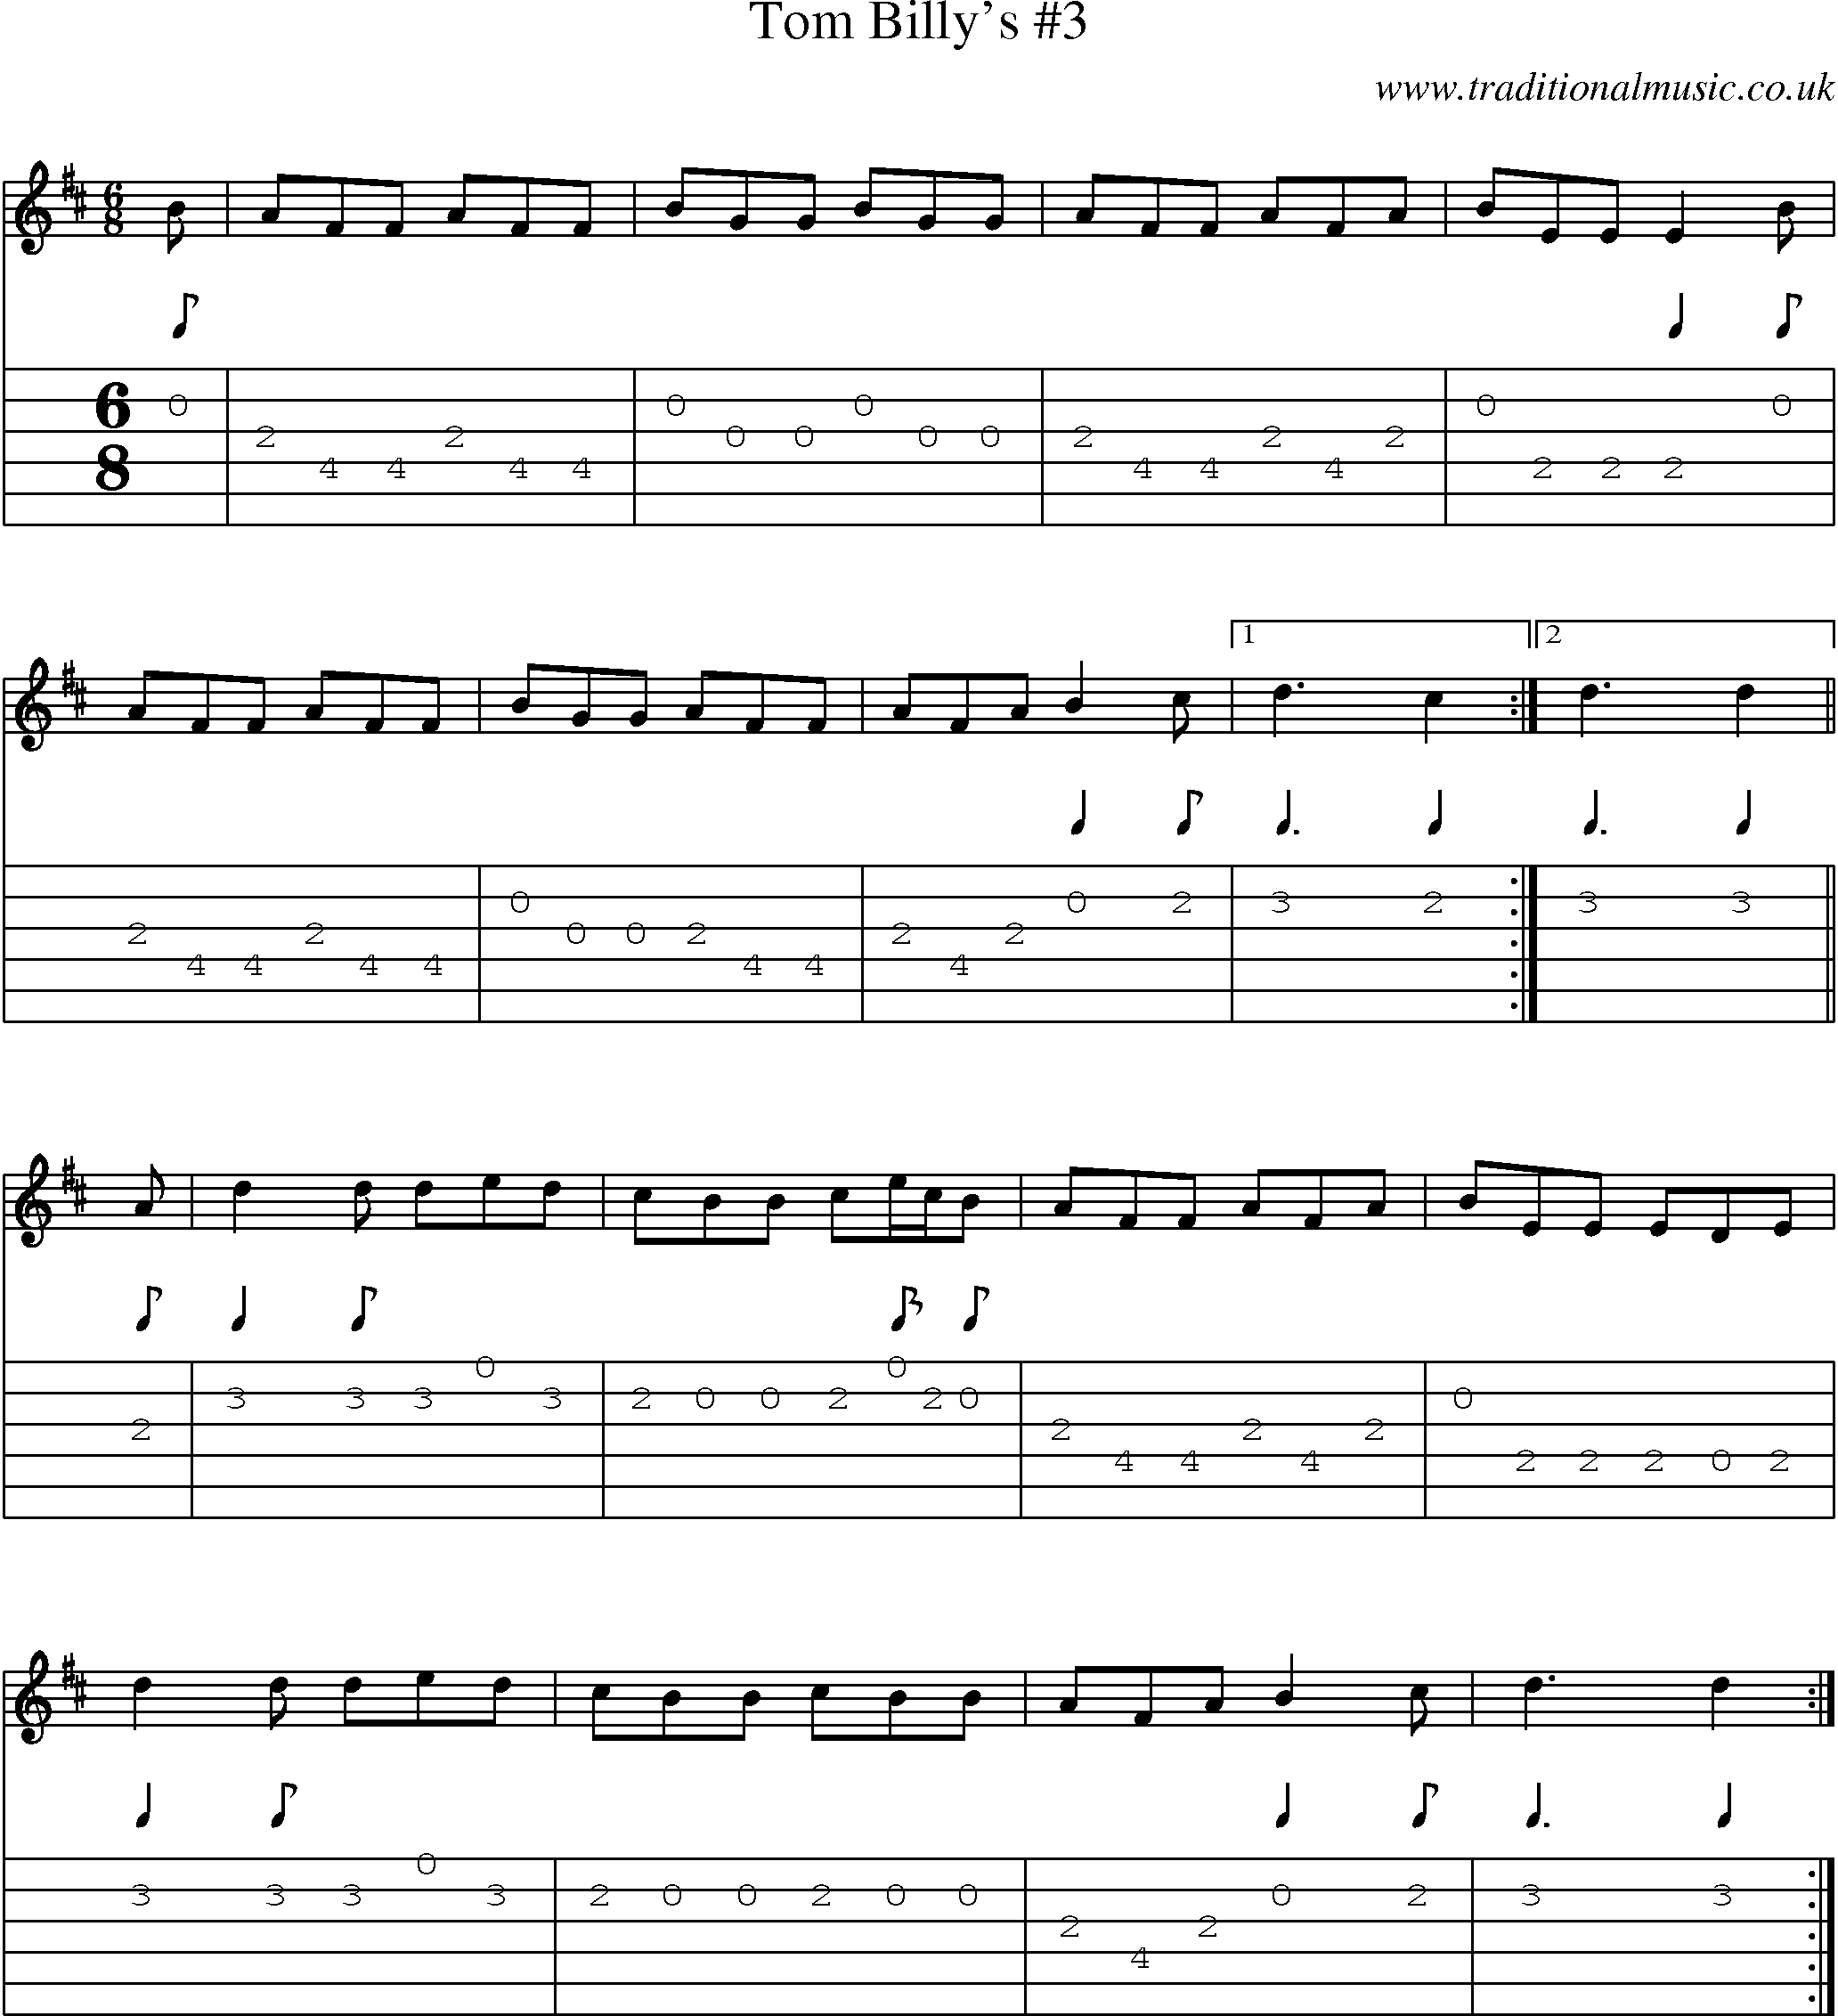 Music Score and Guitar Tabs for Tom Billys 3